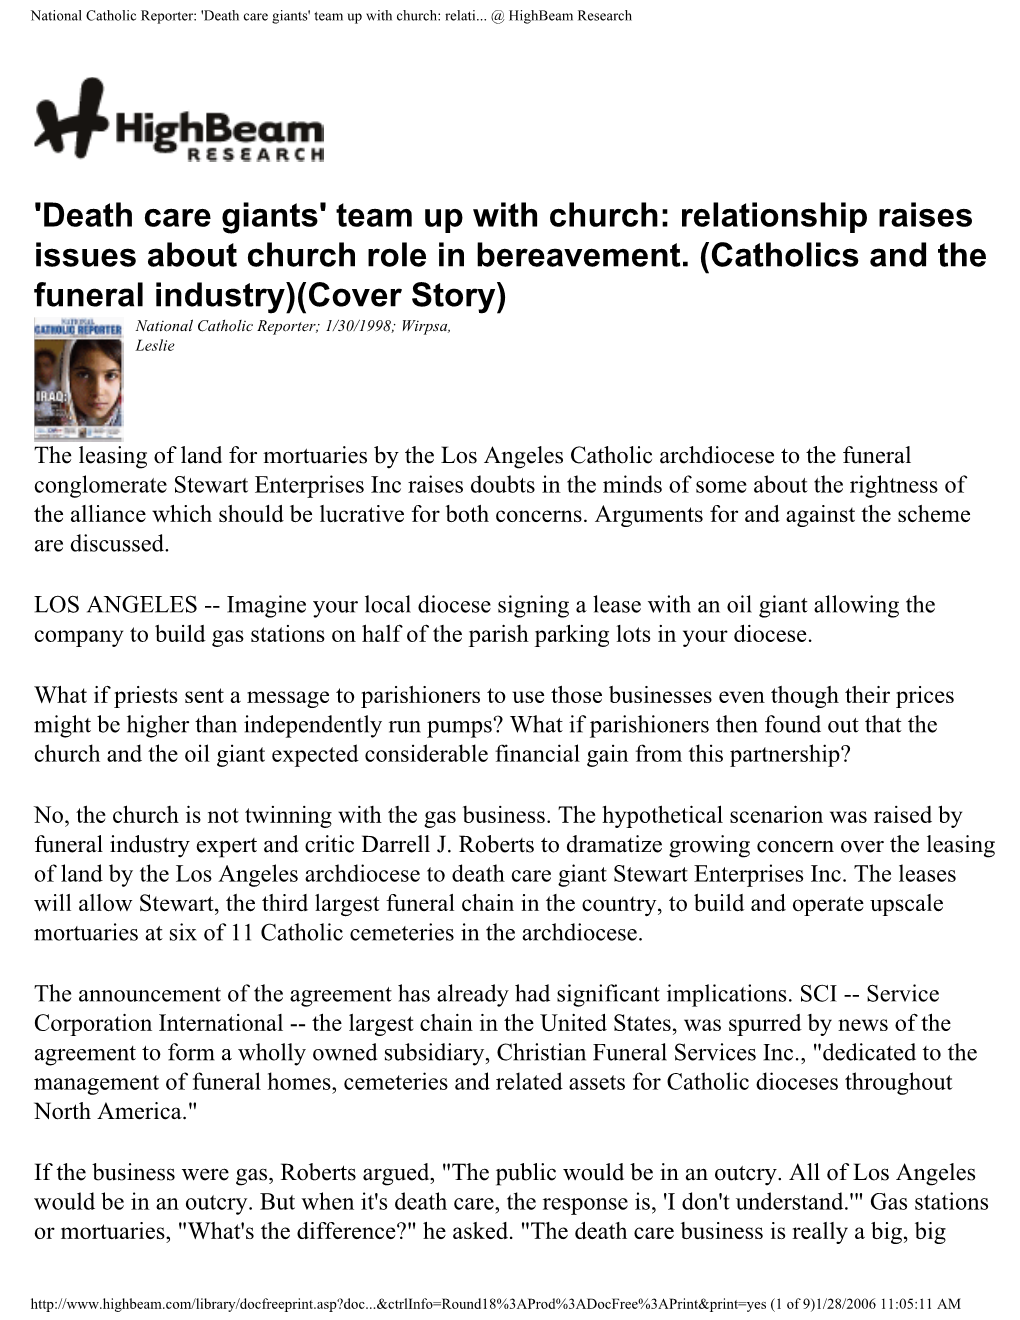 National Catholic Reporter: 'Death Care Giants' Team up with Church: Relati